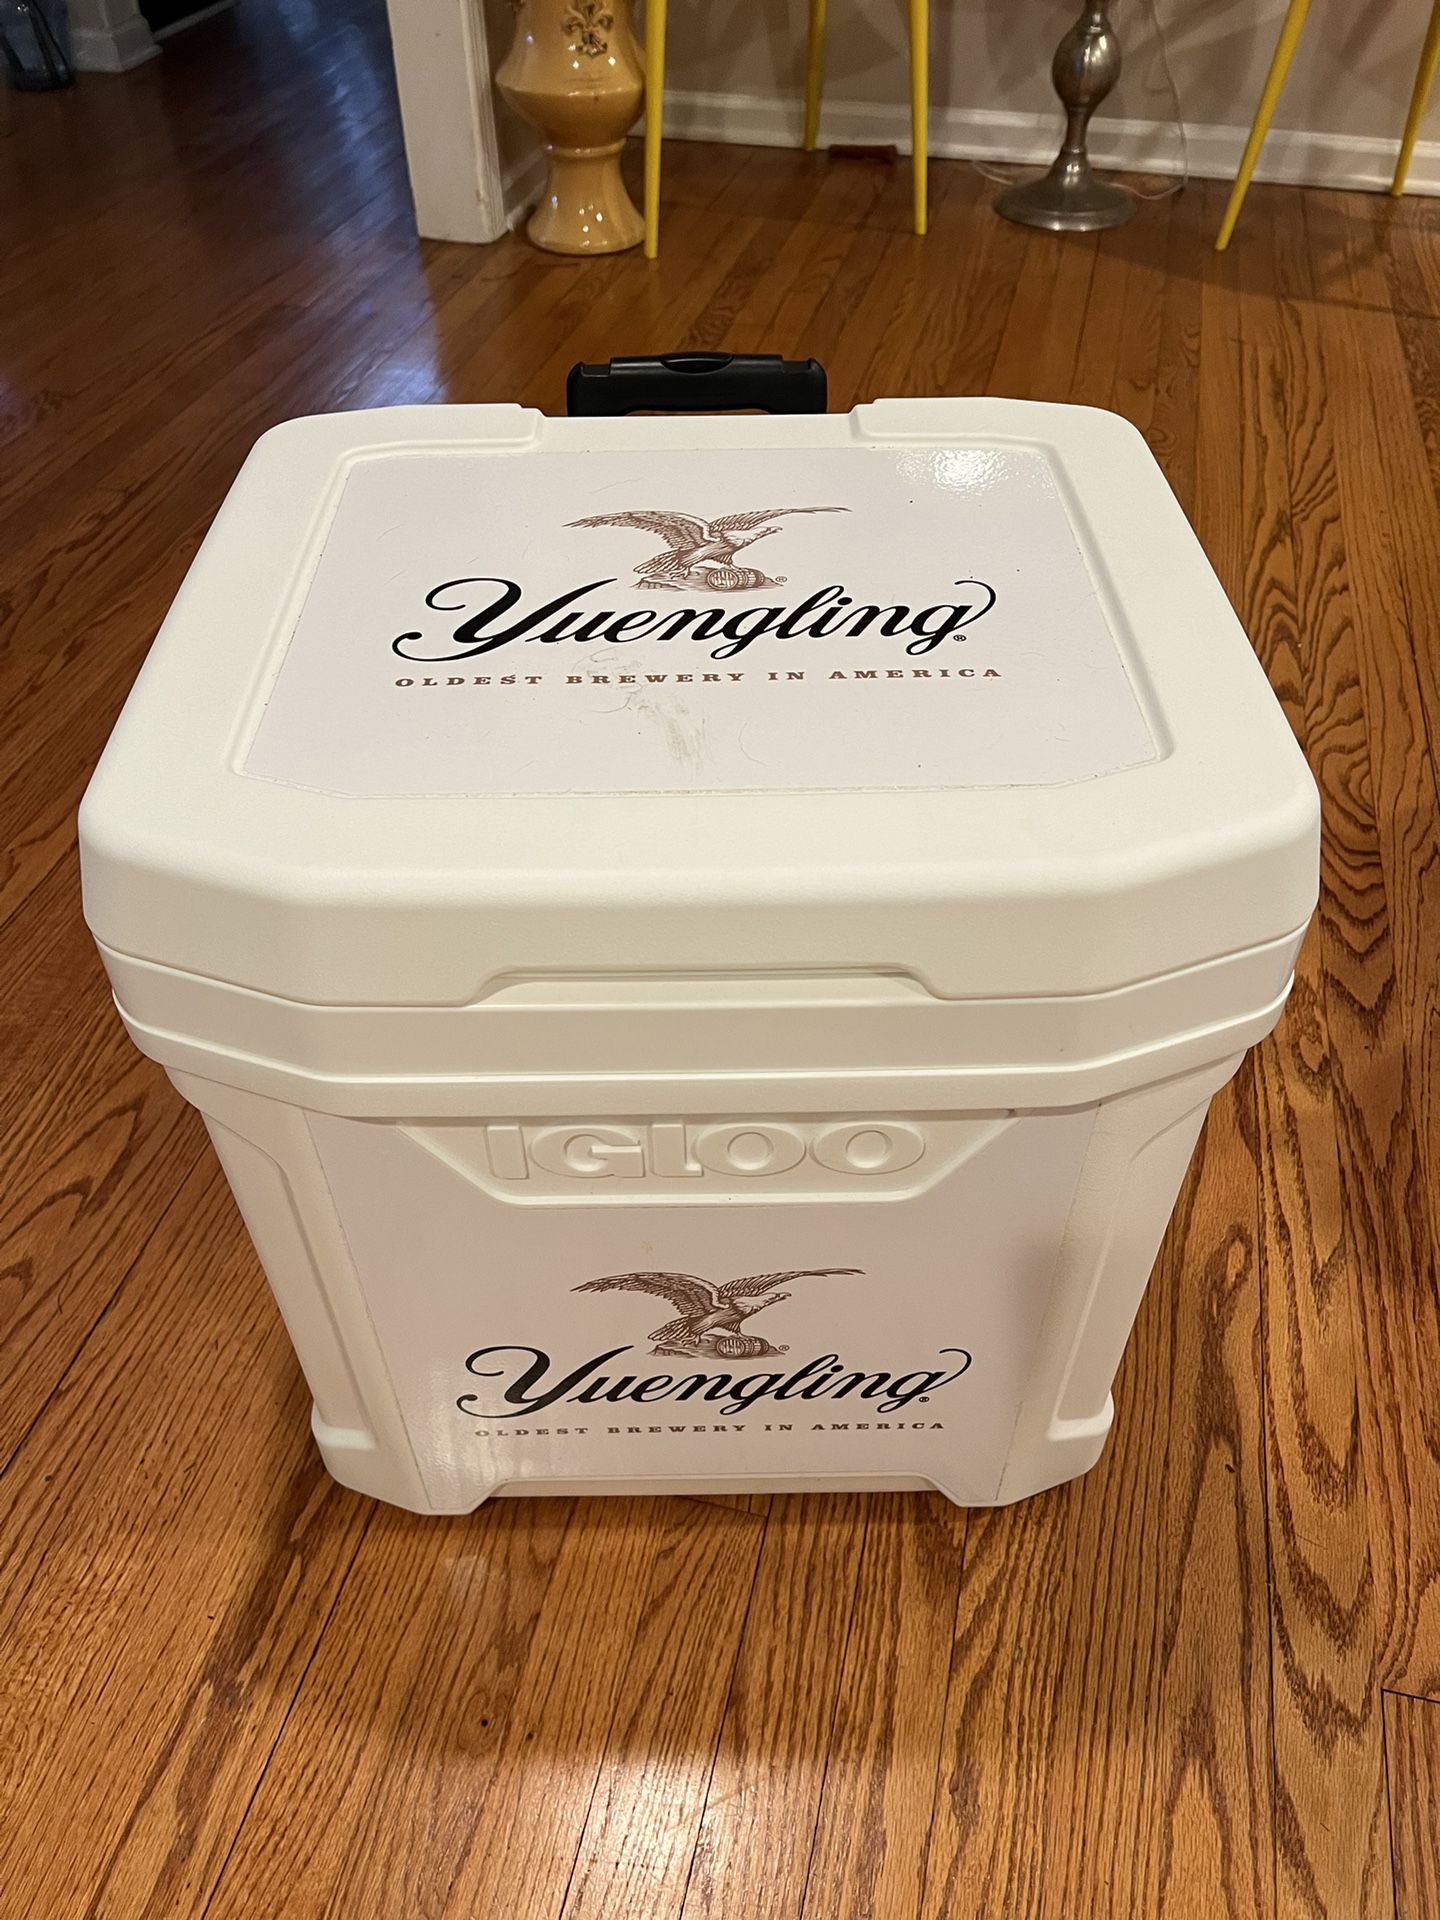 Yuengling branded rolling igloo cooler